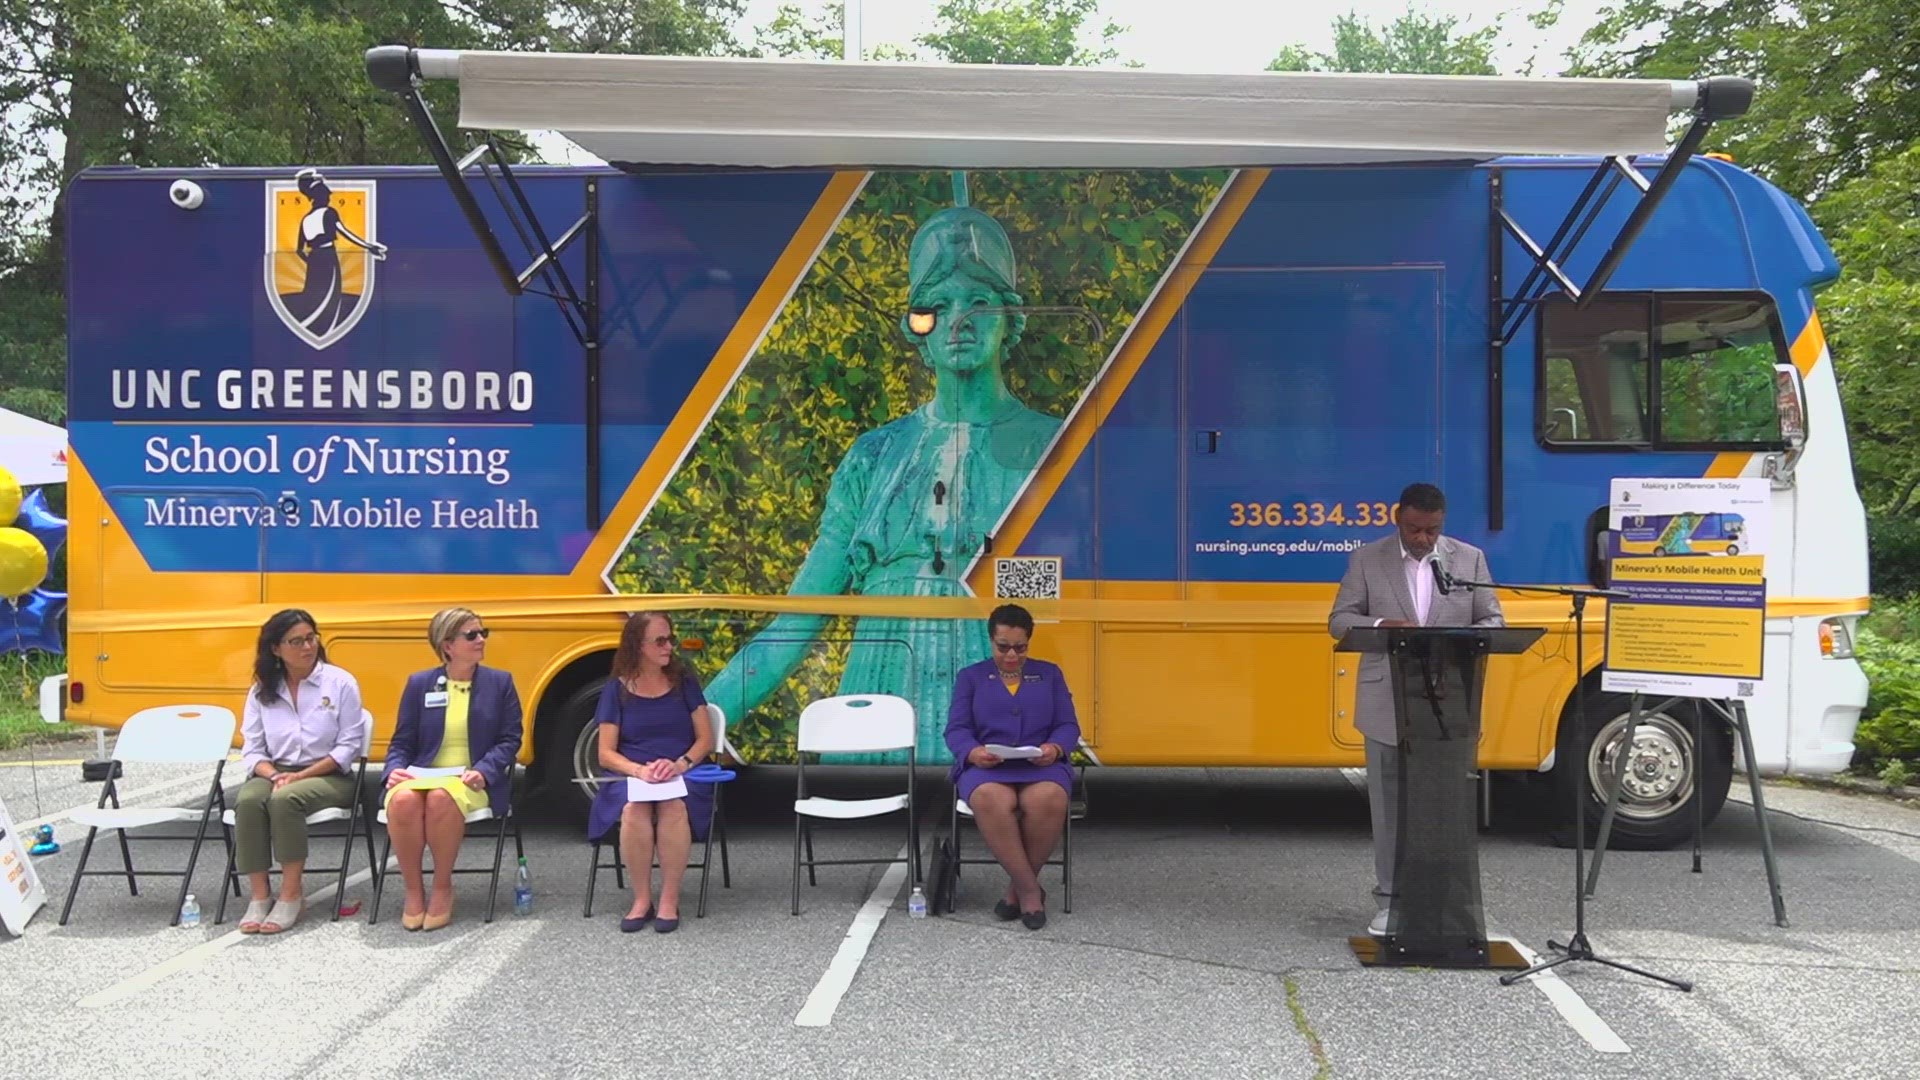 Life expectancy in Greensboro depends on where you live. UNCG and Cone Health hope to bring healthcare to you.